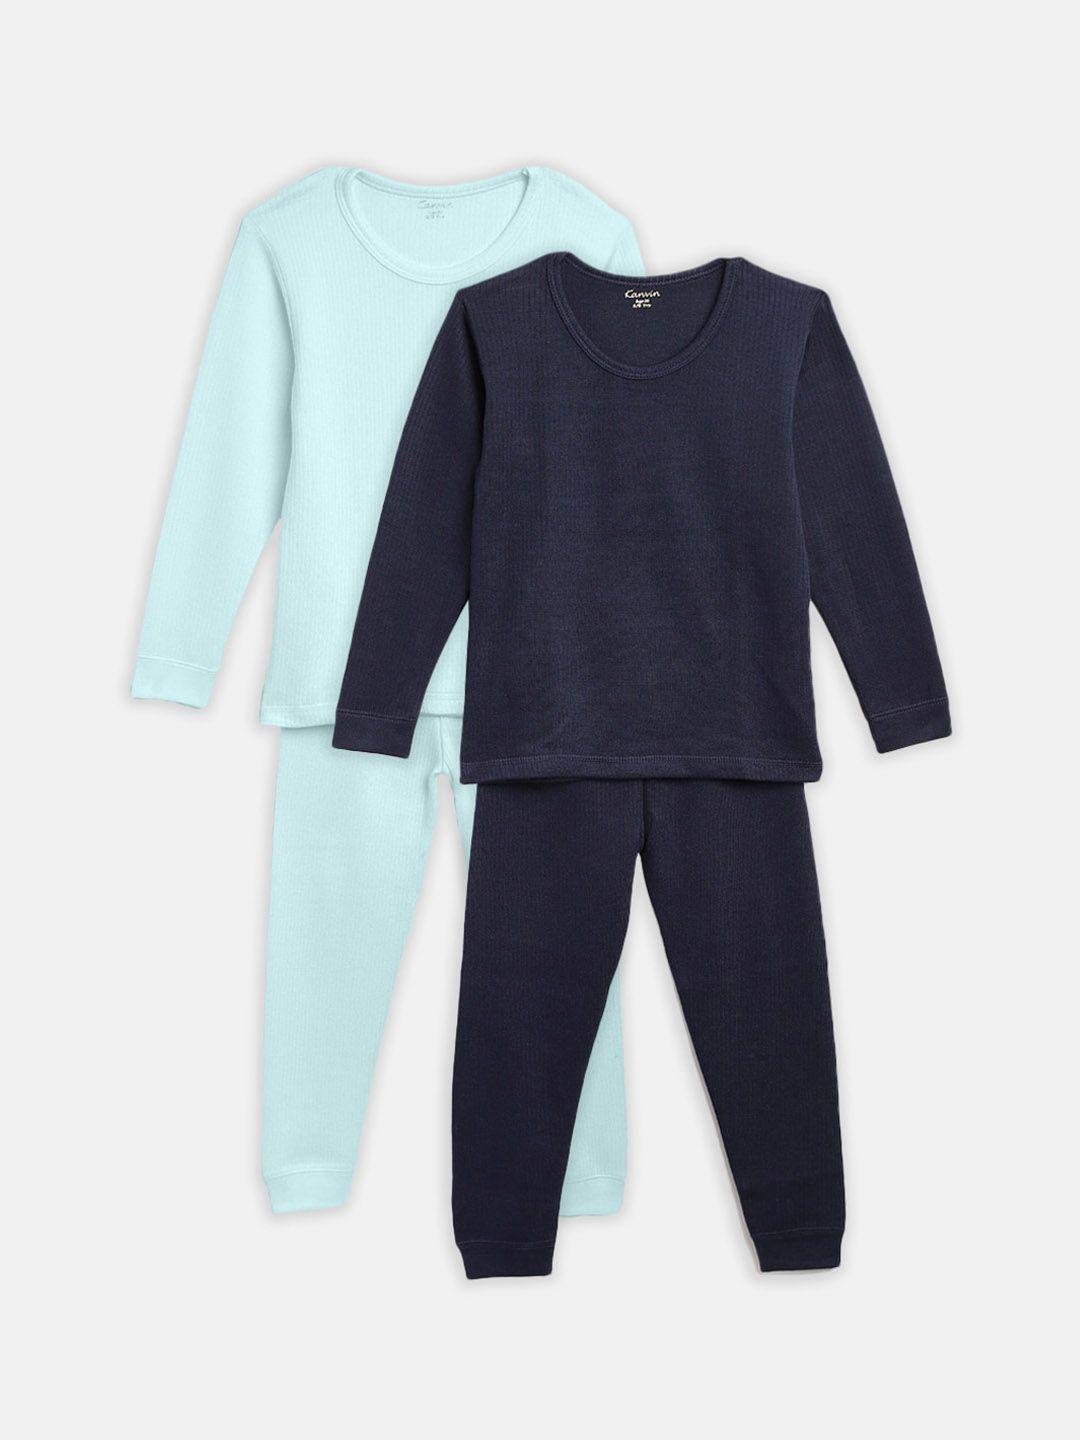 kanvin-boys-turquoise-blue-&-navy-blue-set-of-2-self-striped-thermal-set